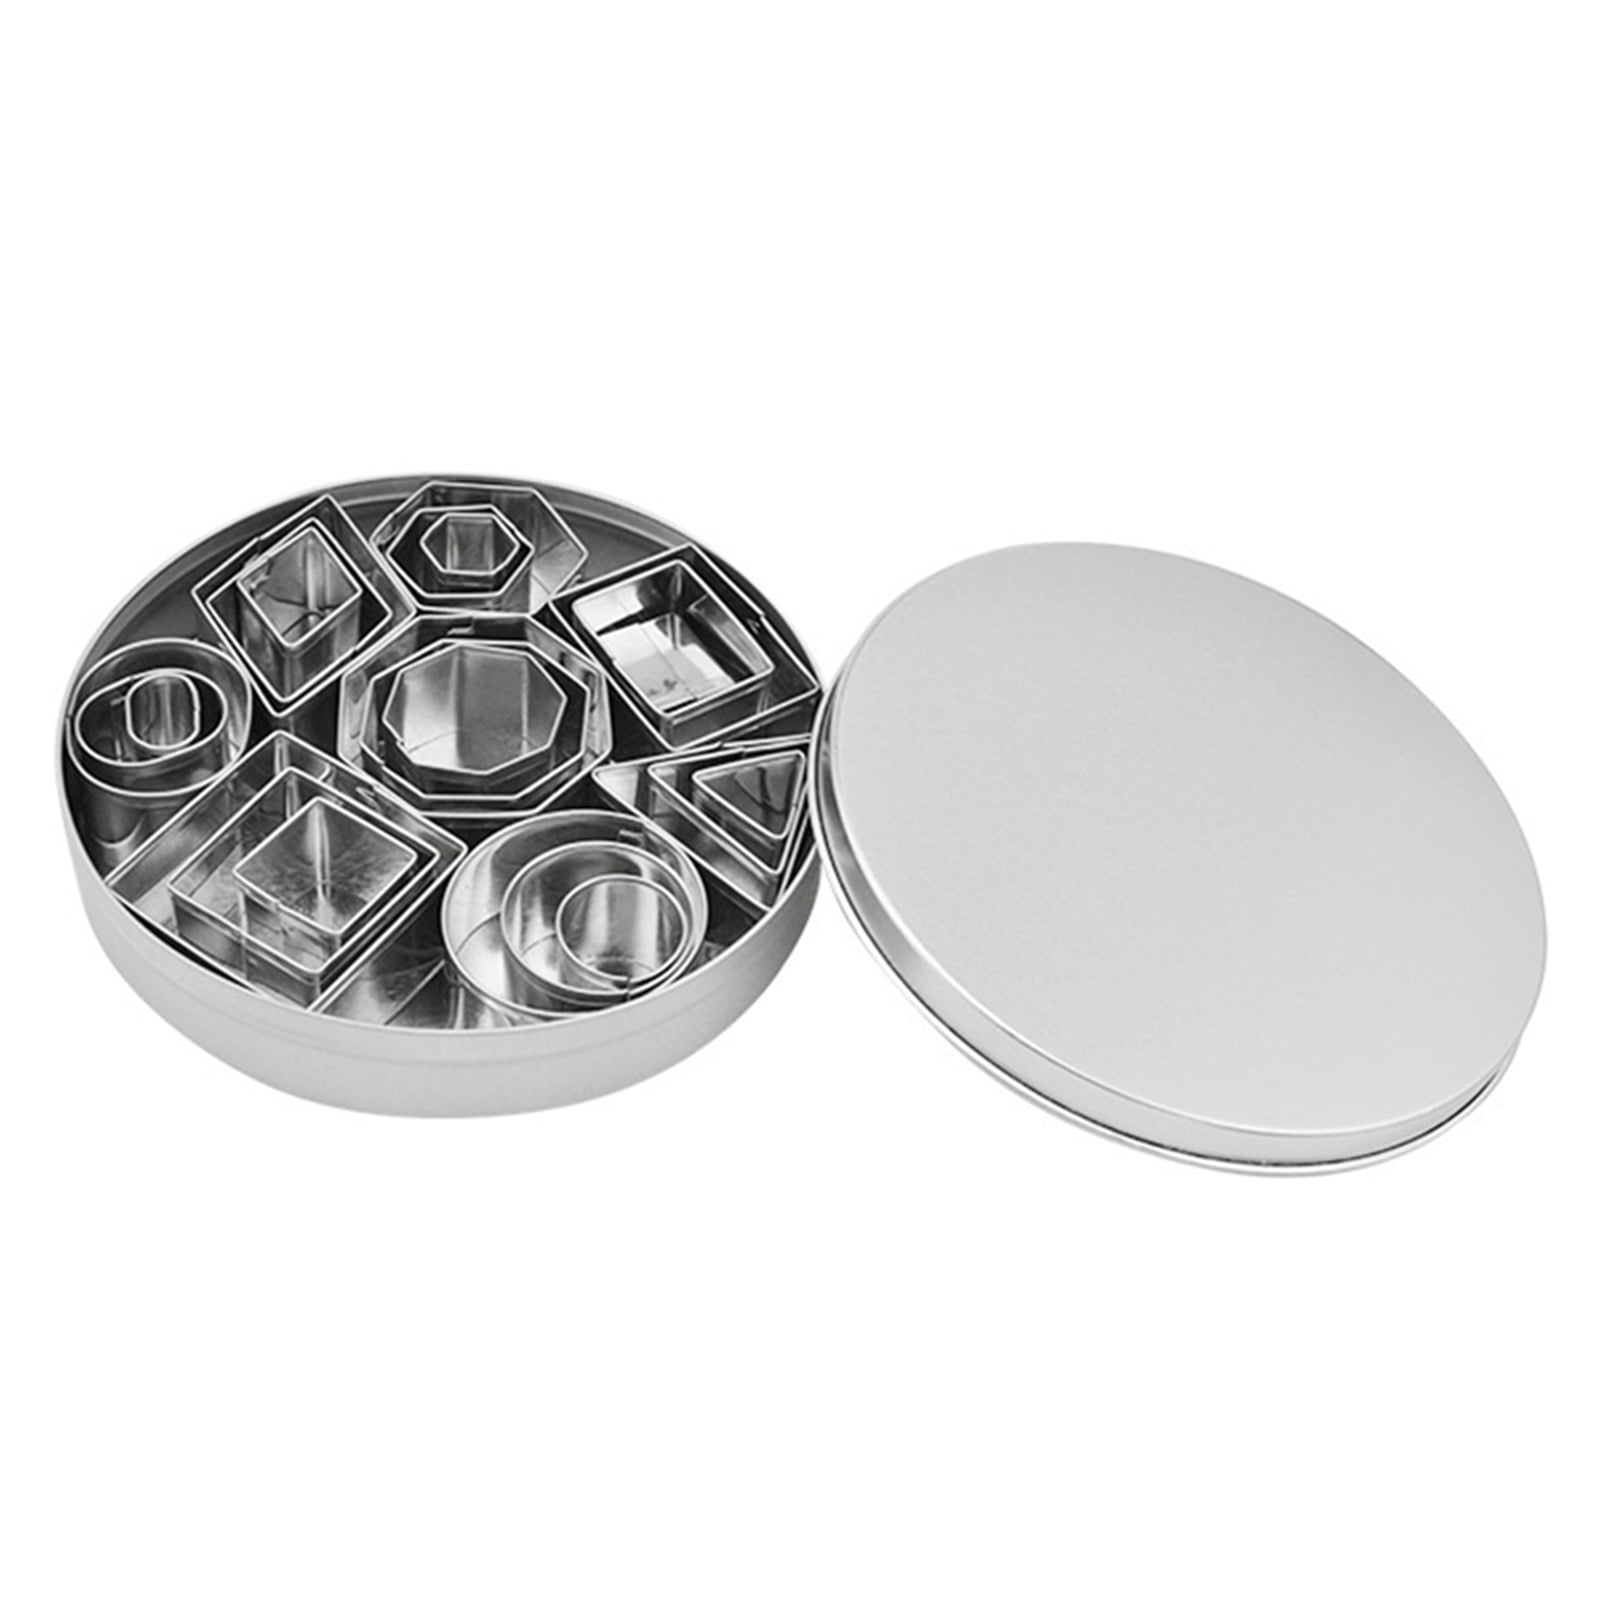 24pcs/Set Cake Stainless Steel Cookie Round Mold Baking Cutter Biscuit BEST T3W6 